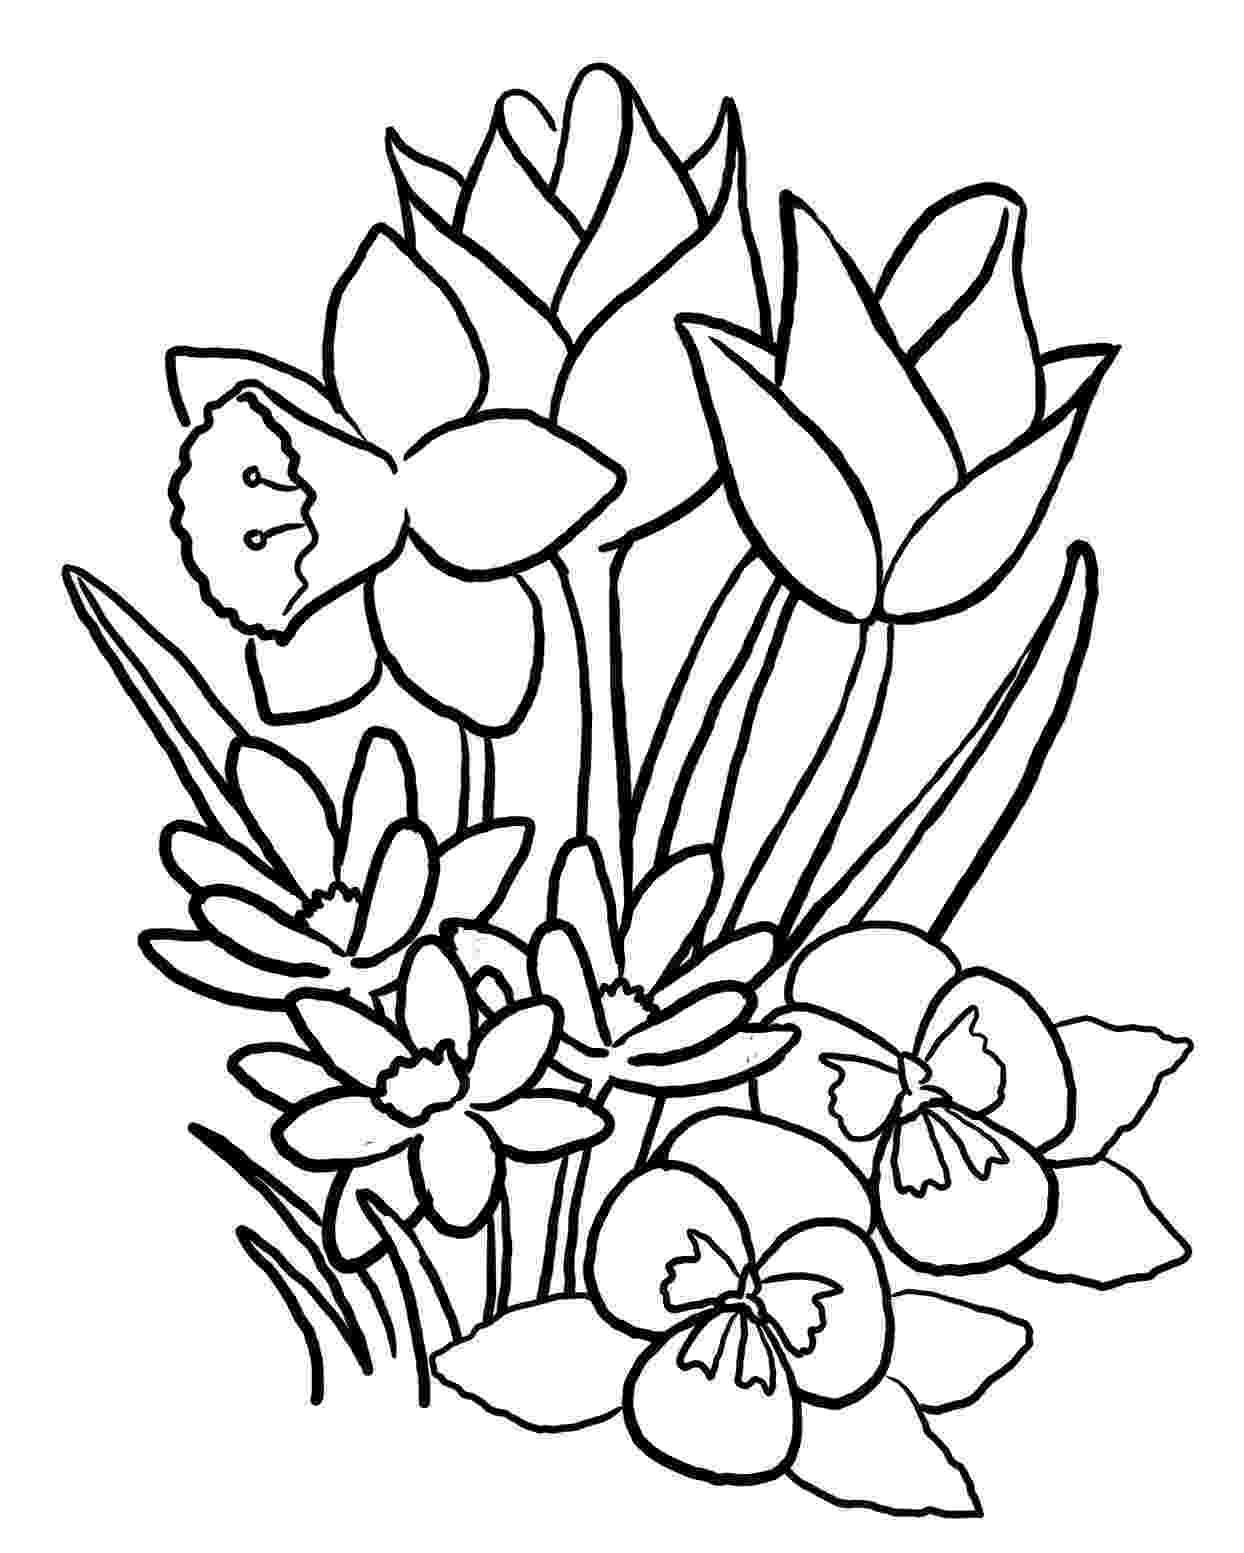 coloring images of flowers free printable flower coloring pages for kids best of images flowers coloring 1 1